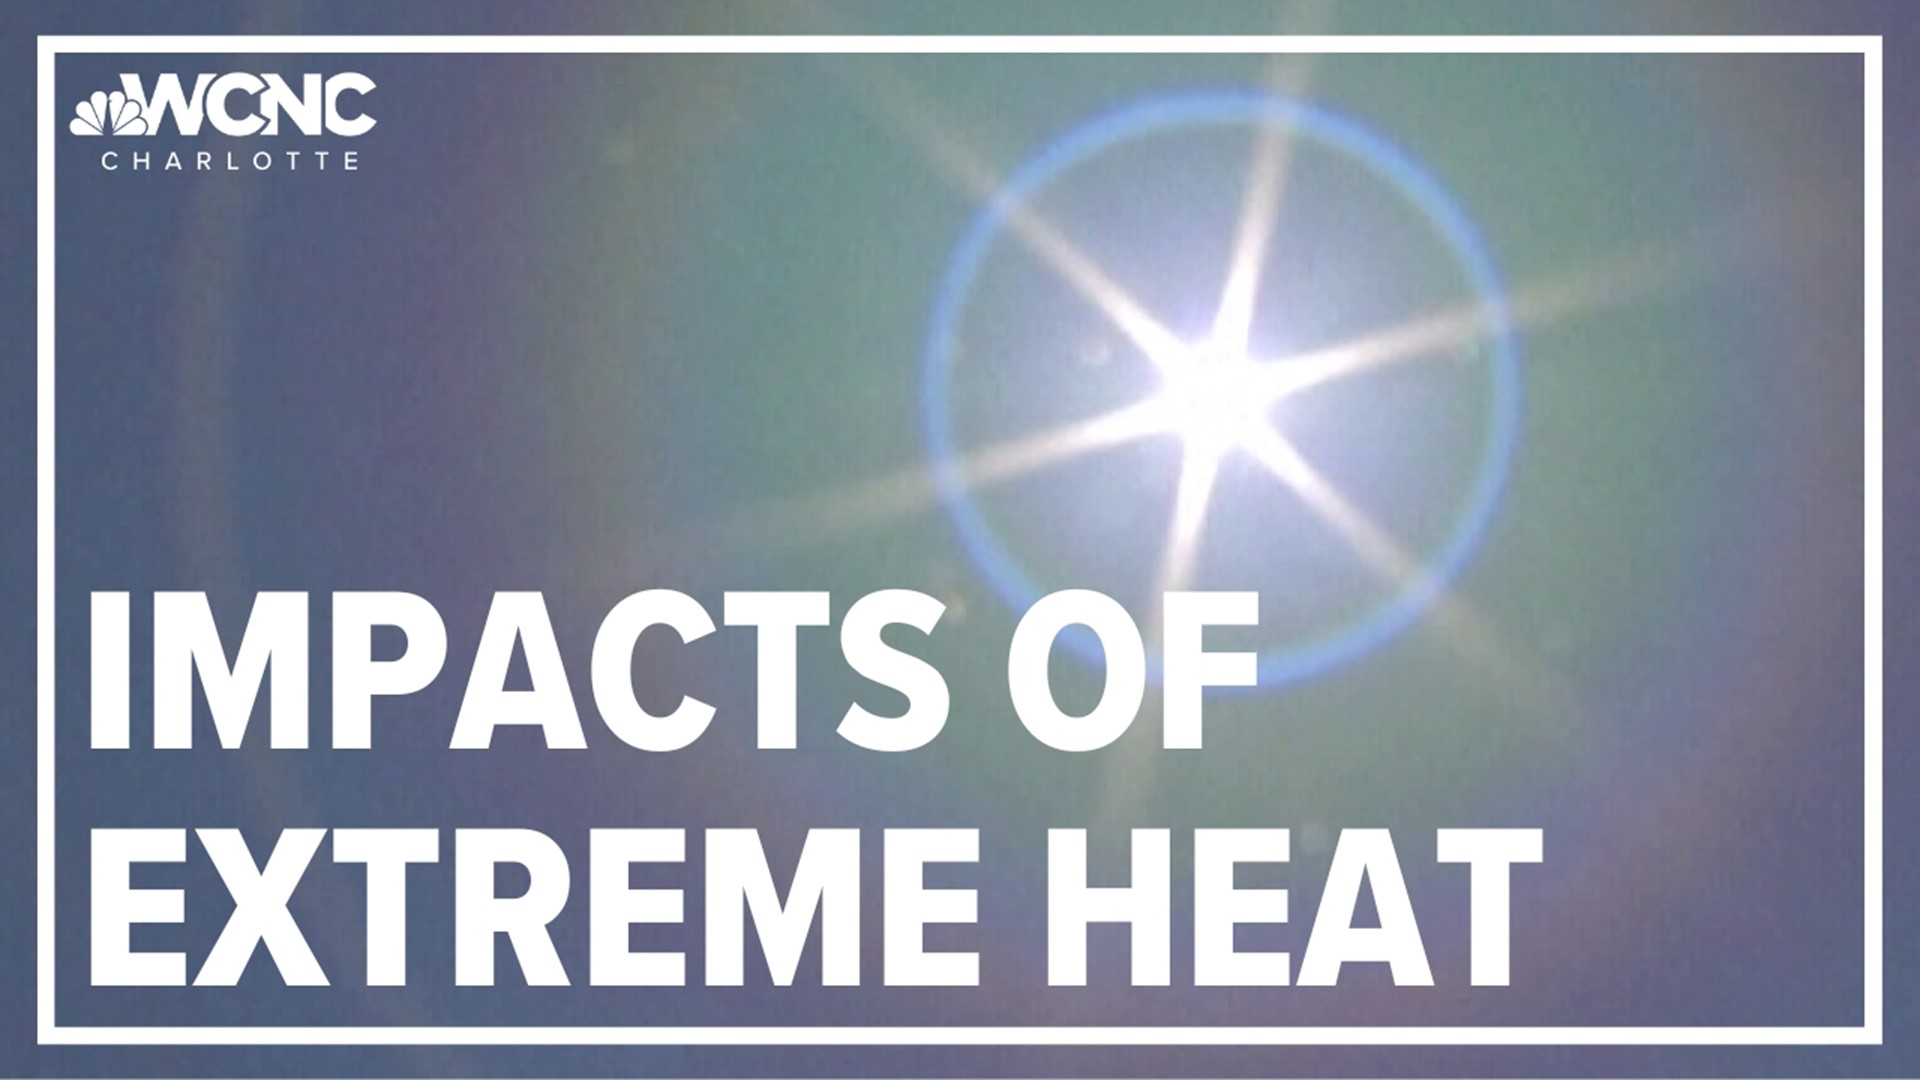 With the extreme heat, experts share some tips on how to keep your HVAC systems running.